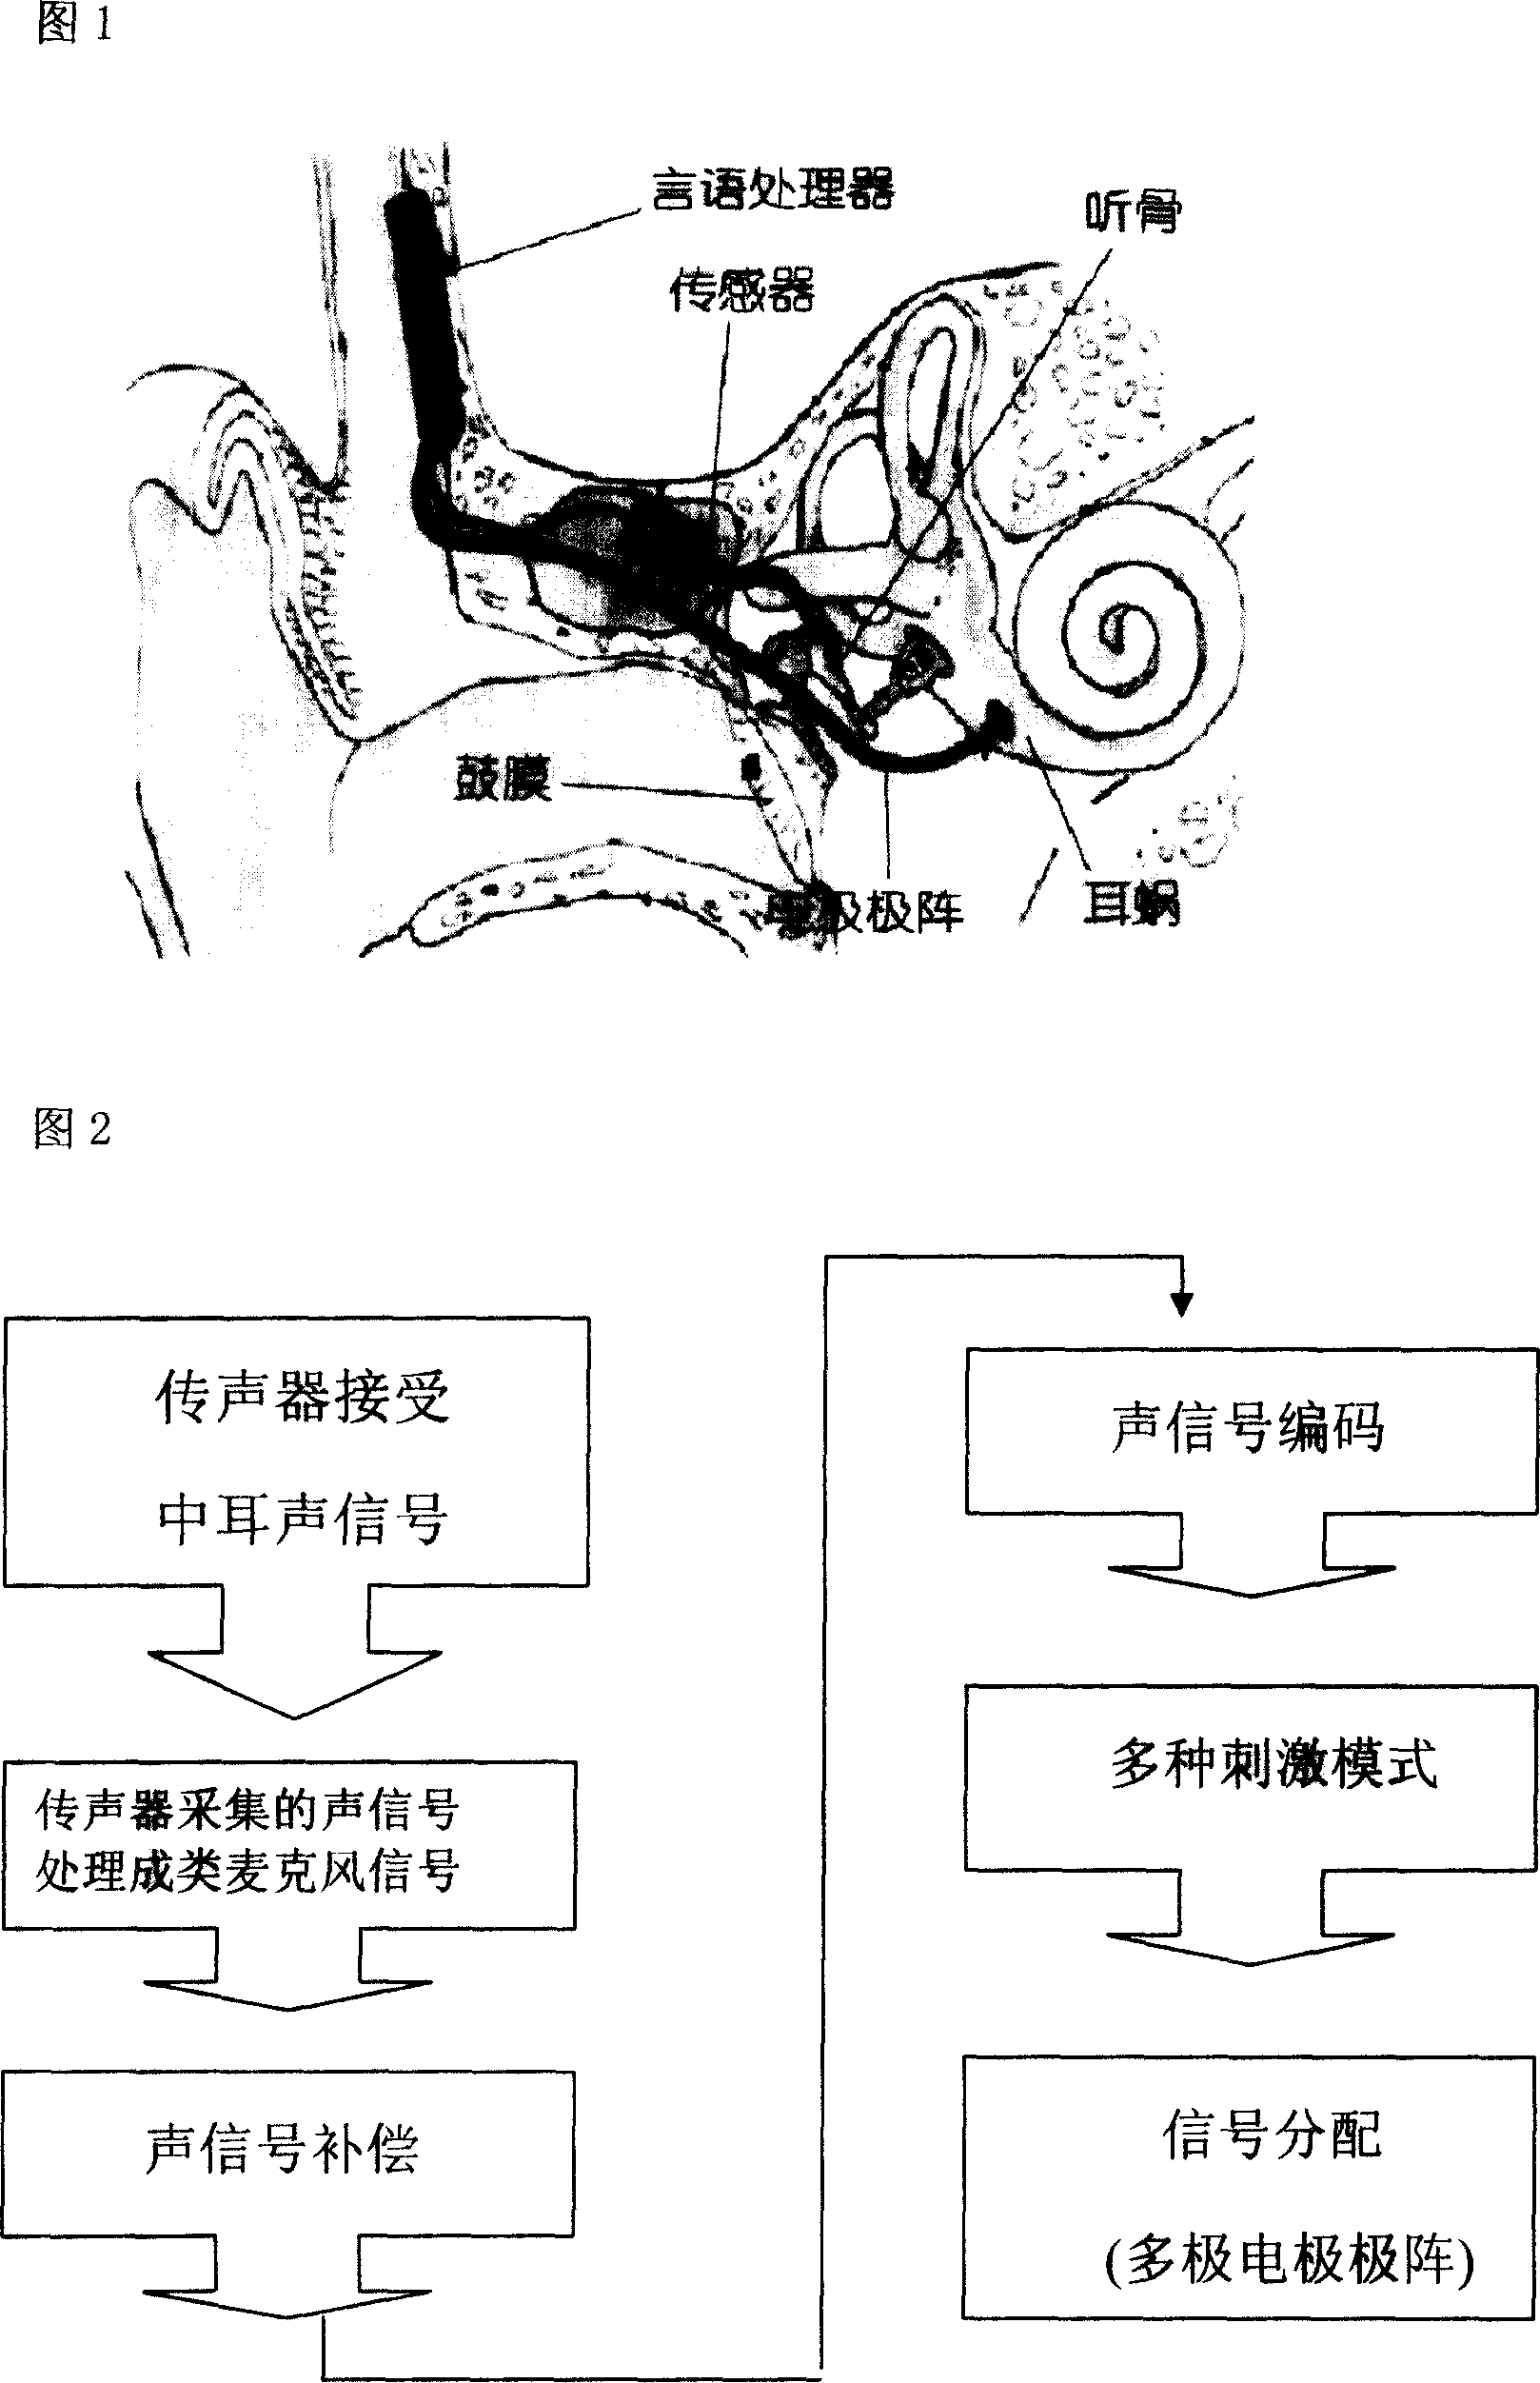 Full-implanting type artificial cochlea and method for making same